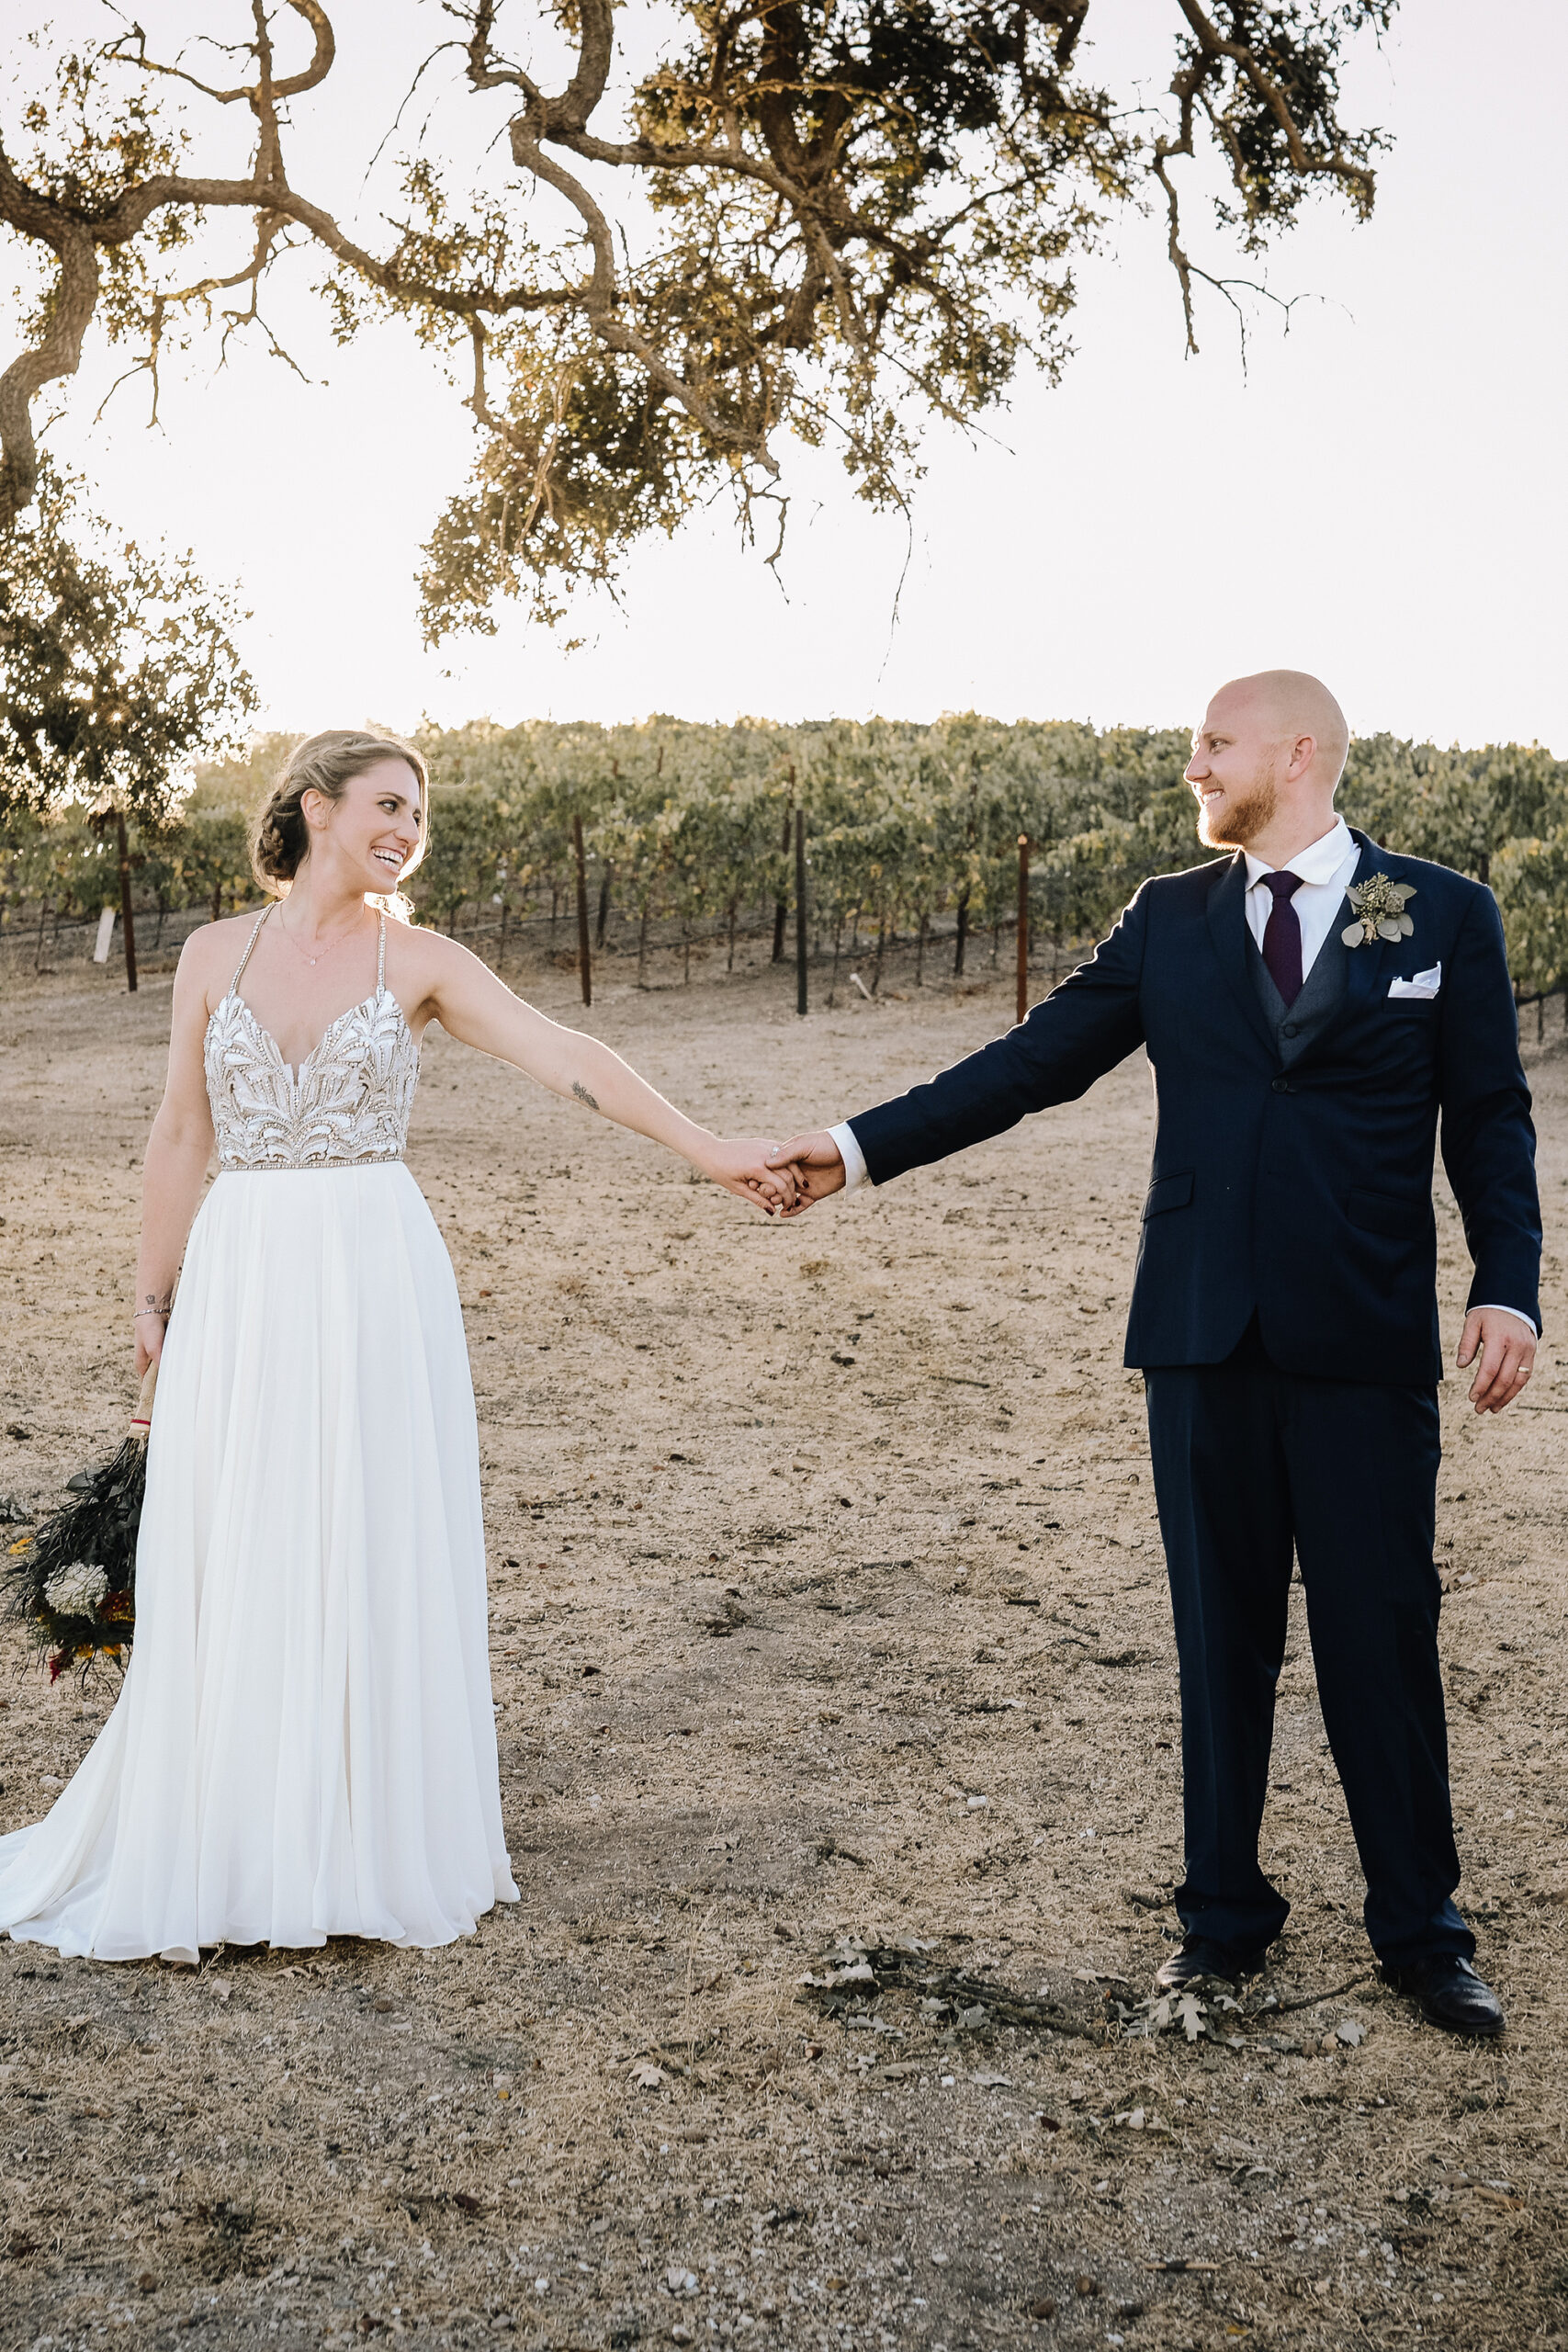 Kristen Carter Rustic Winery Wedding KDot Photography SBS 033 scaled